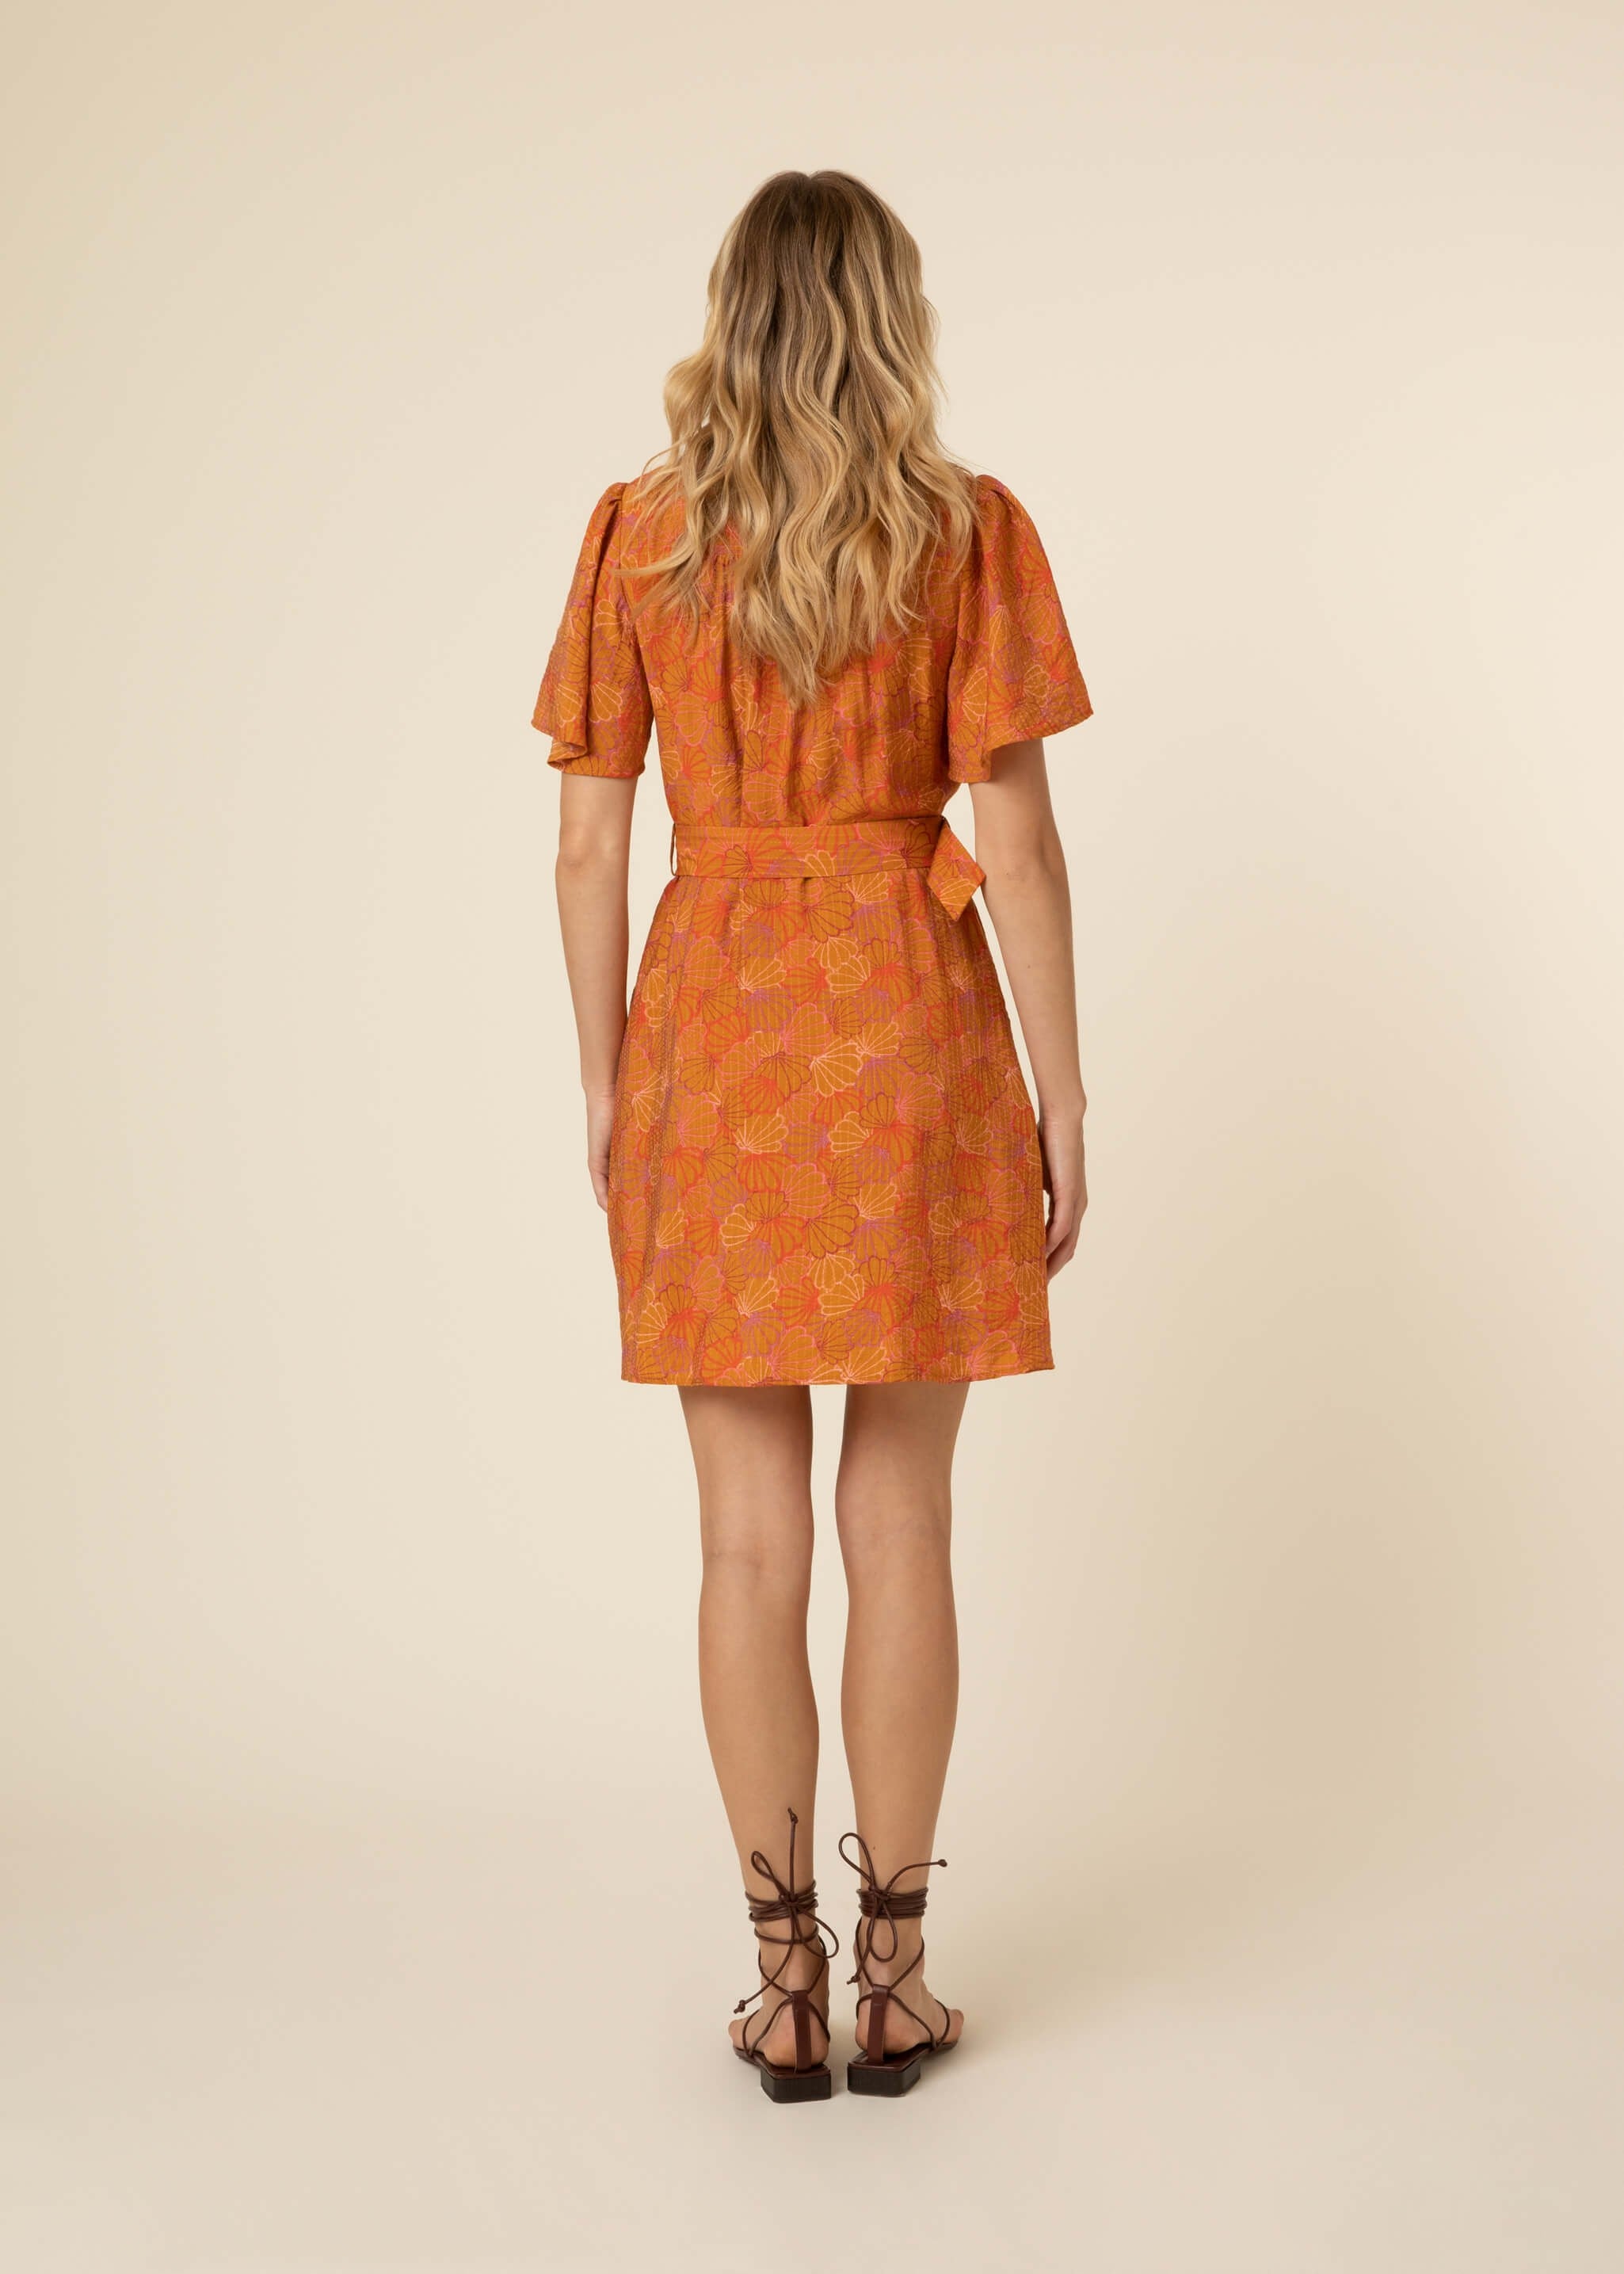 The Oria Woven Belted Dress by FRNCH